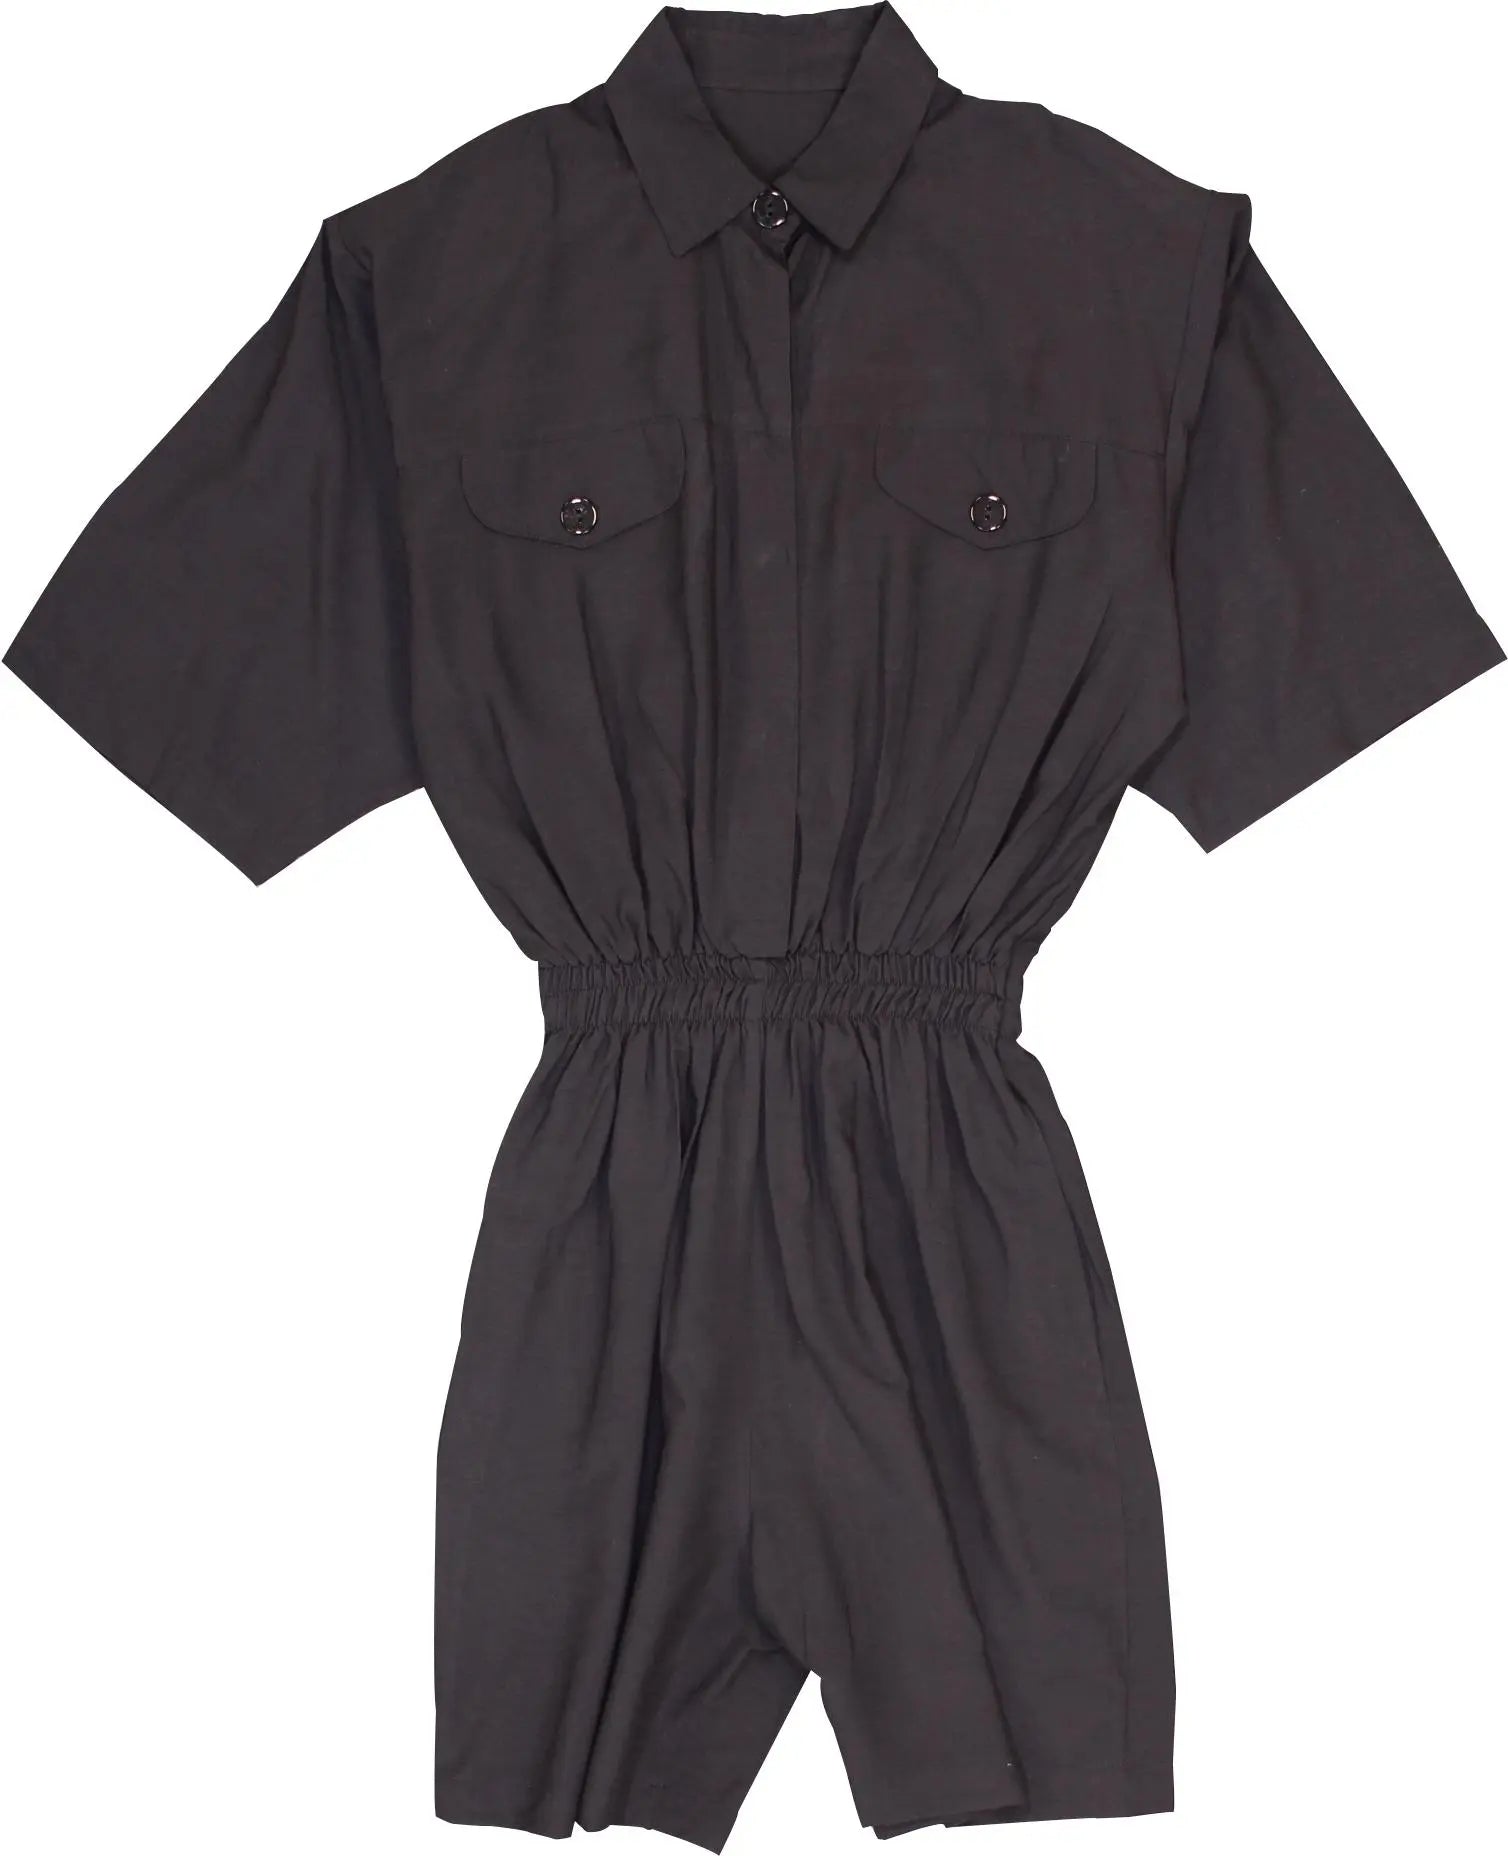 Unknown - Black Jumpsuit with Shoulder Pads- ThriftTale.com - Vintage and second handclothing